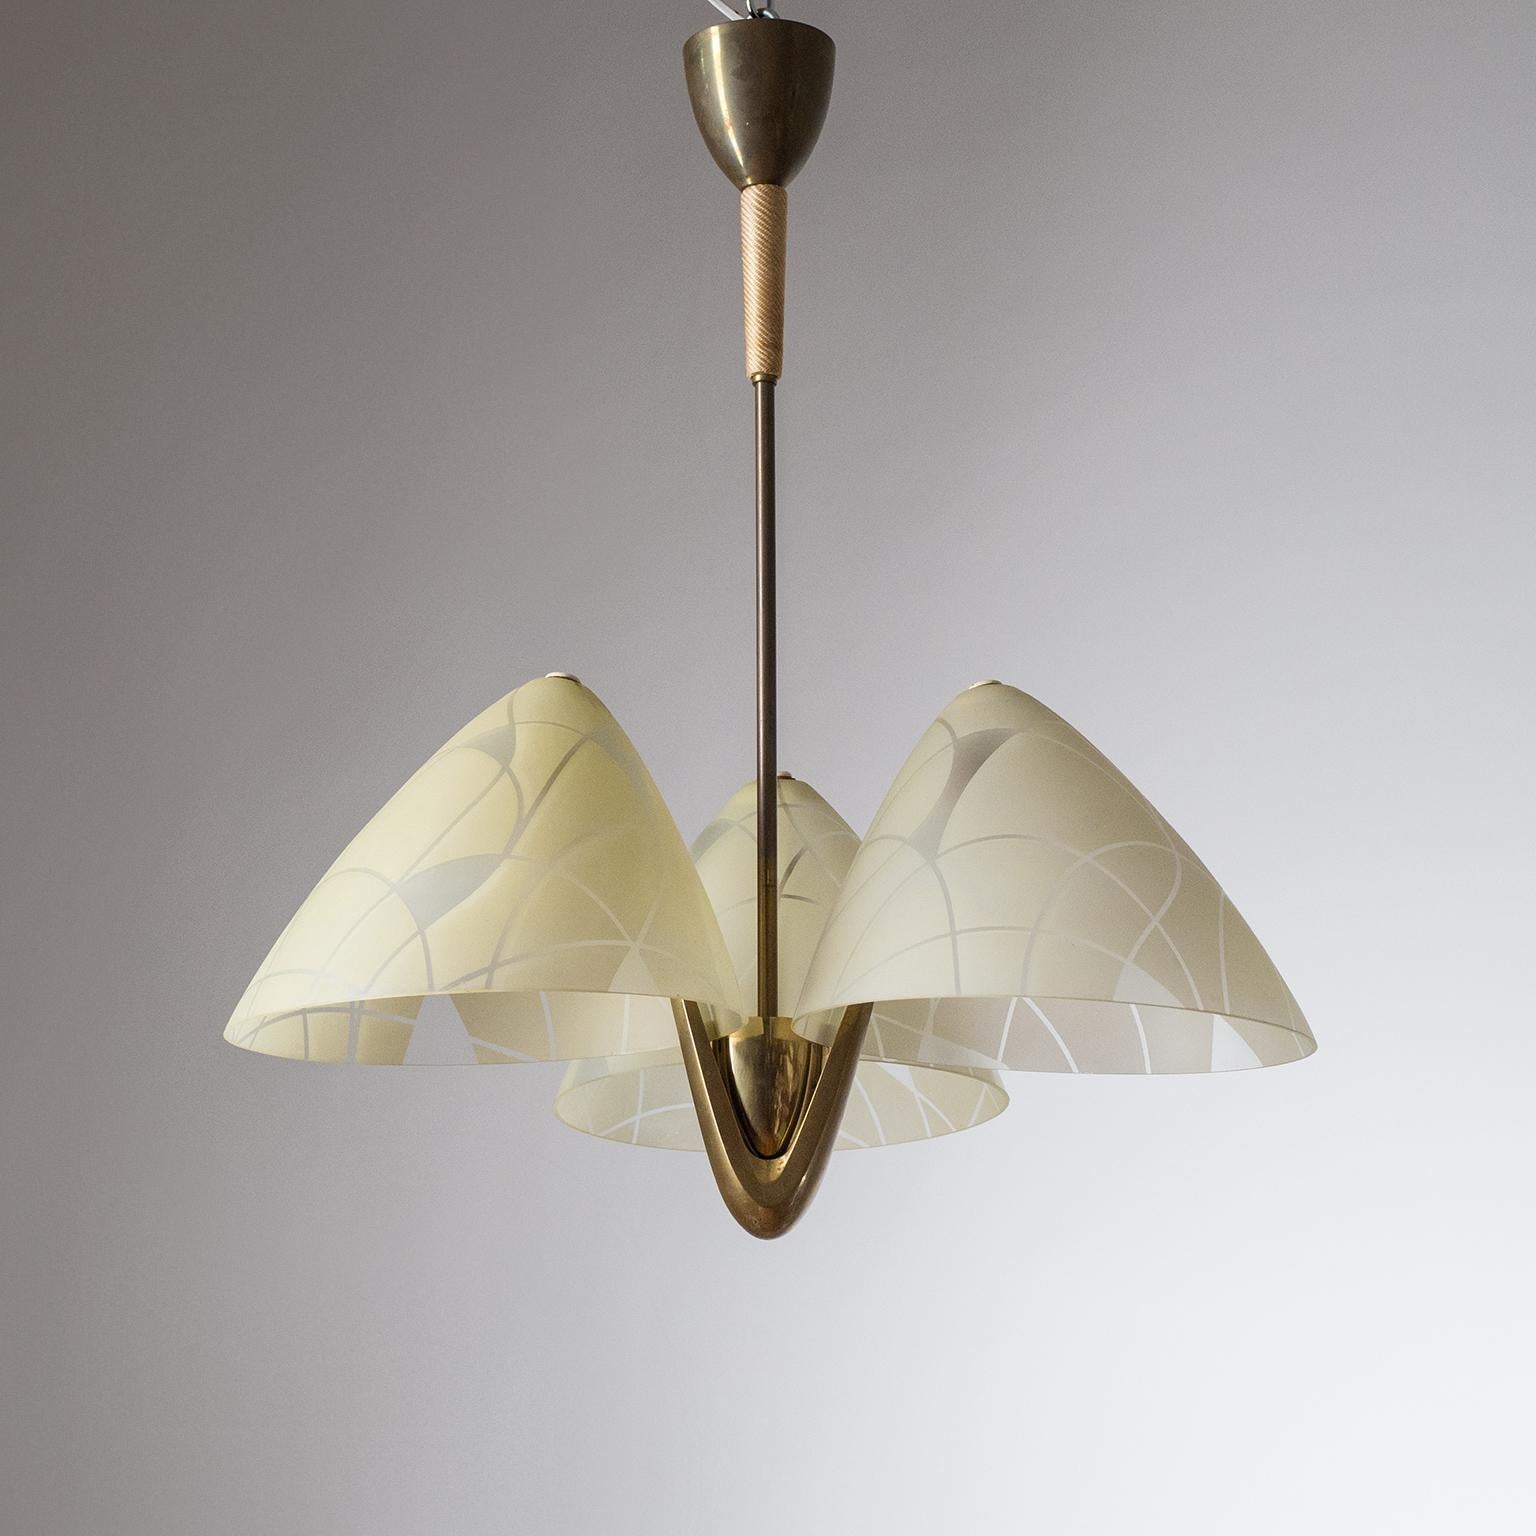 Rare Art Deco brass chandelier with large enameled glass diffusers from the 1940s. The large cone-shaped blown glass diffusers have a satin finish with an abstract pattern enameled in a pale yellow. Each glass houses one original brass and ceramic